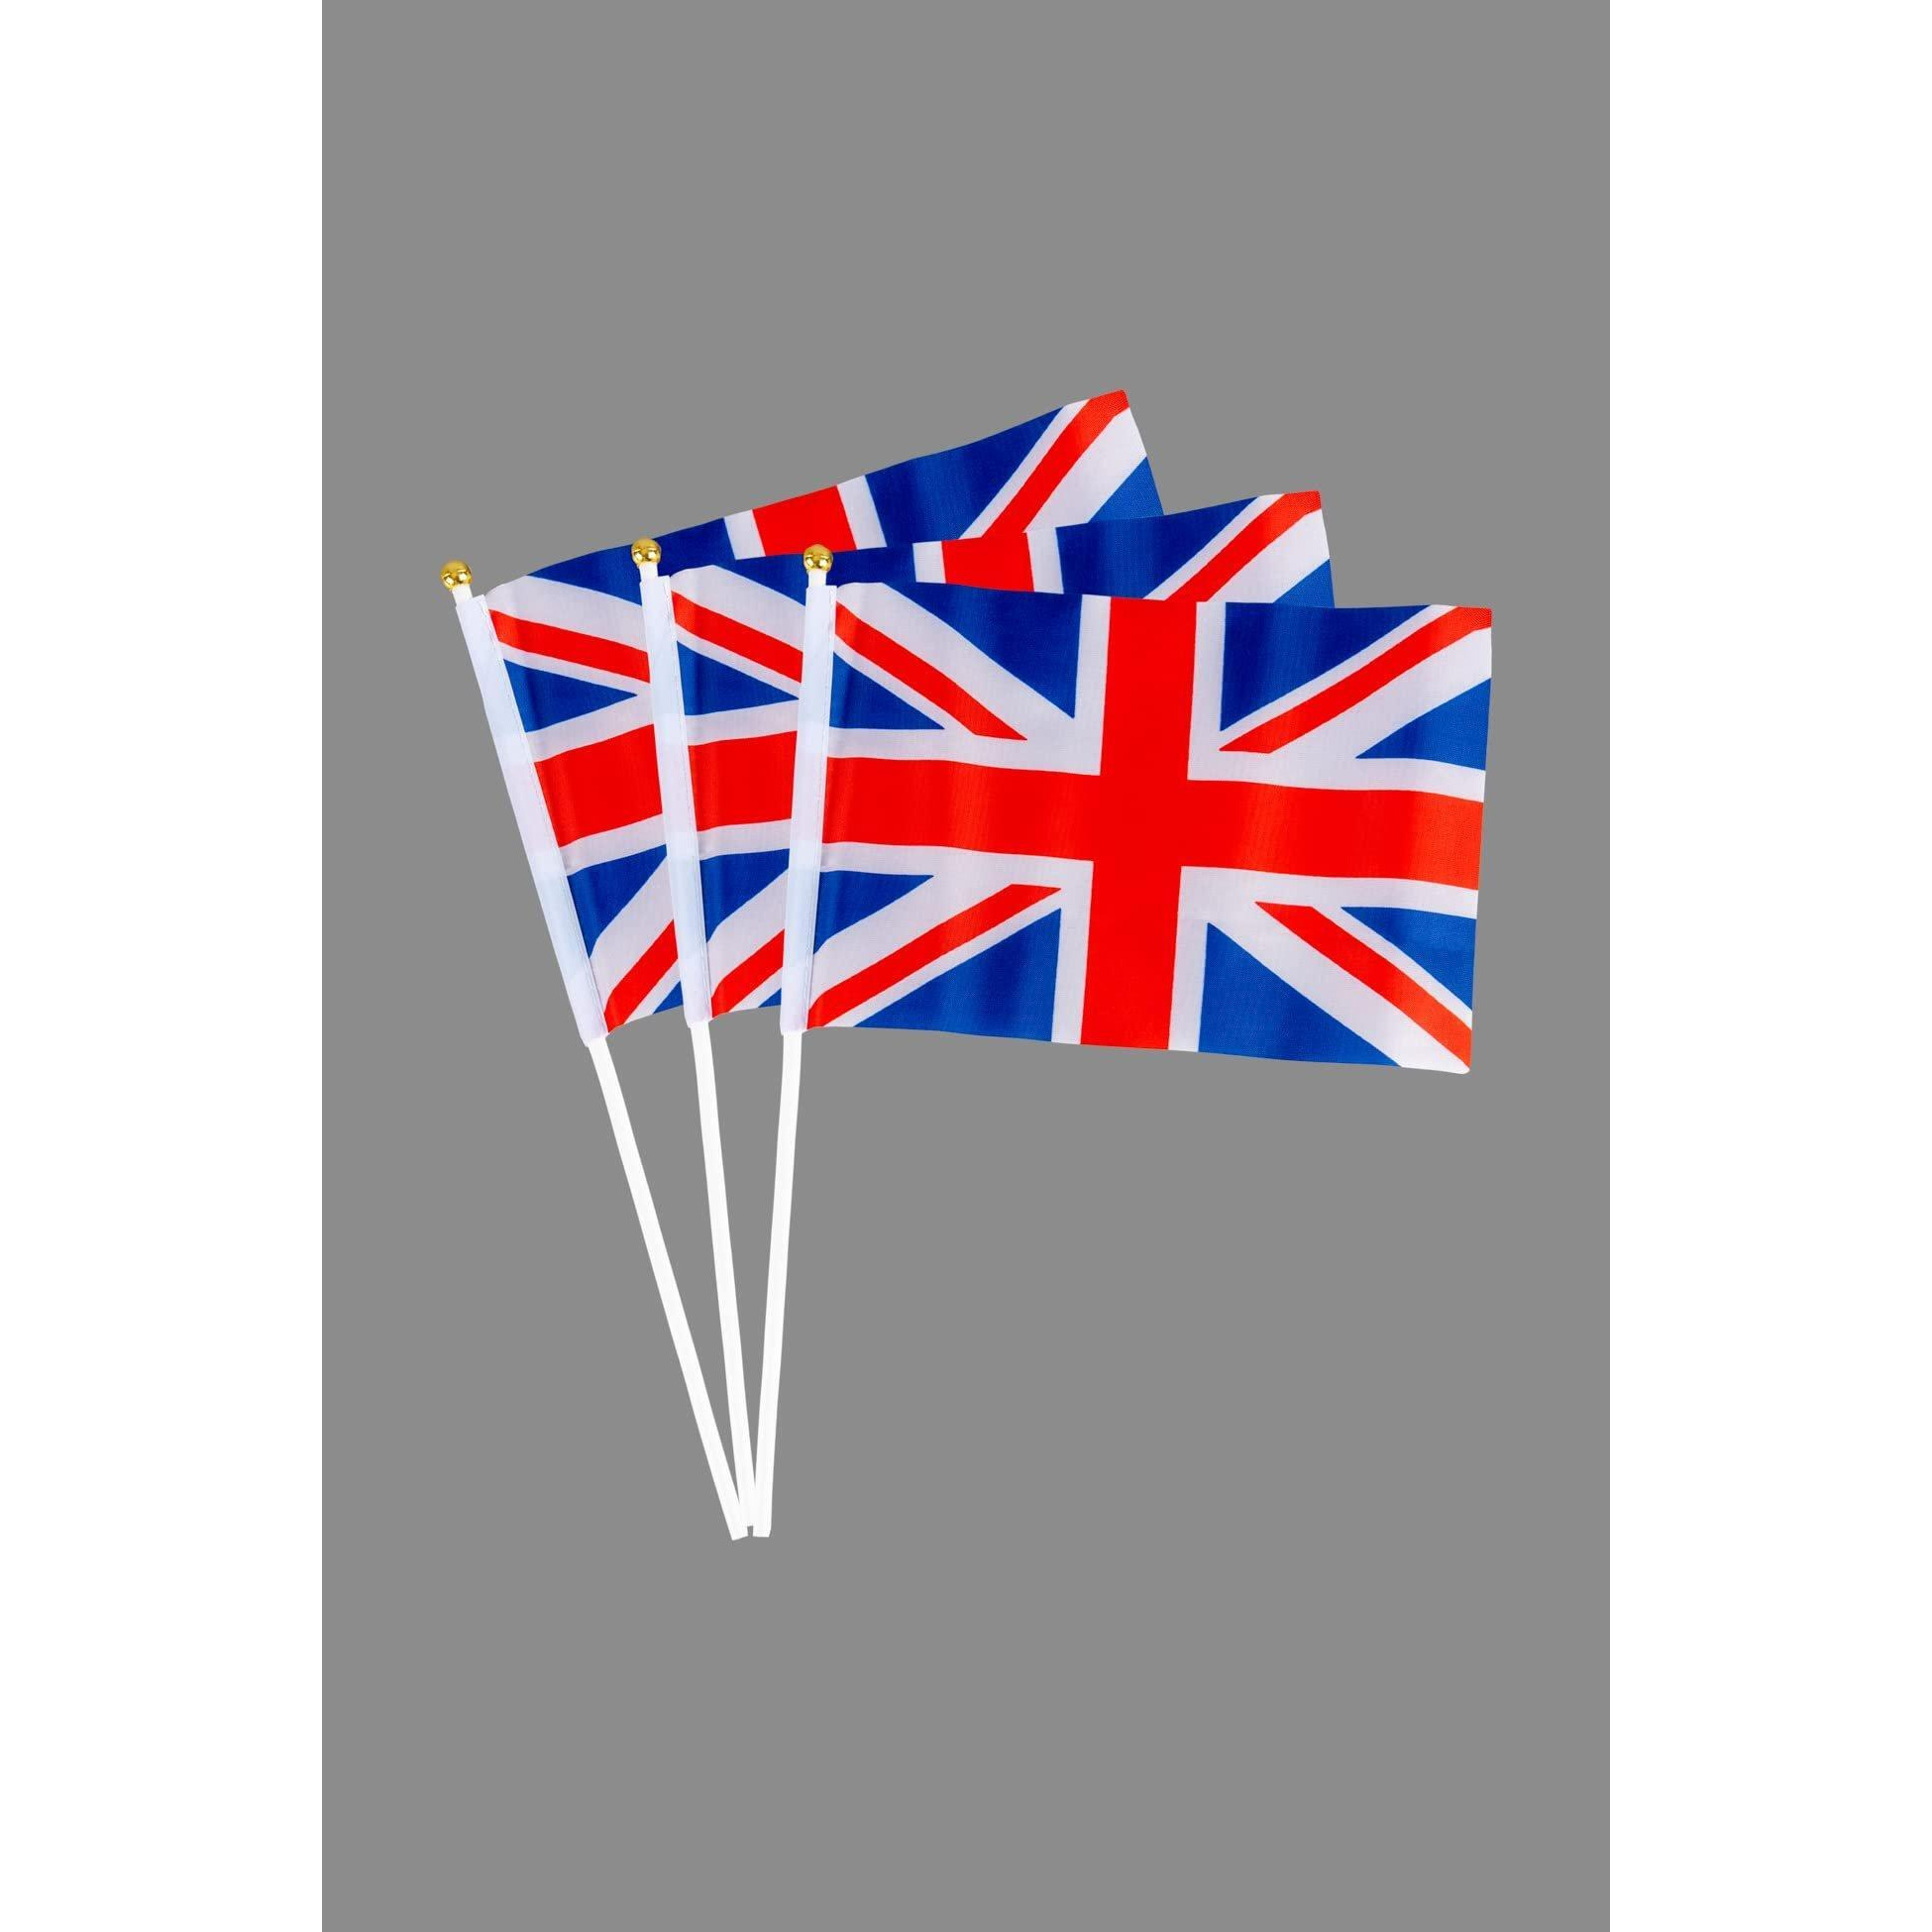 Union Jack Hand Flags pack of 50 King Charles Coronation Waving Flag Royal Street Party Celebrations Sporting Events Pub BBQ Car - image 1